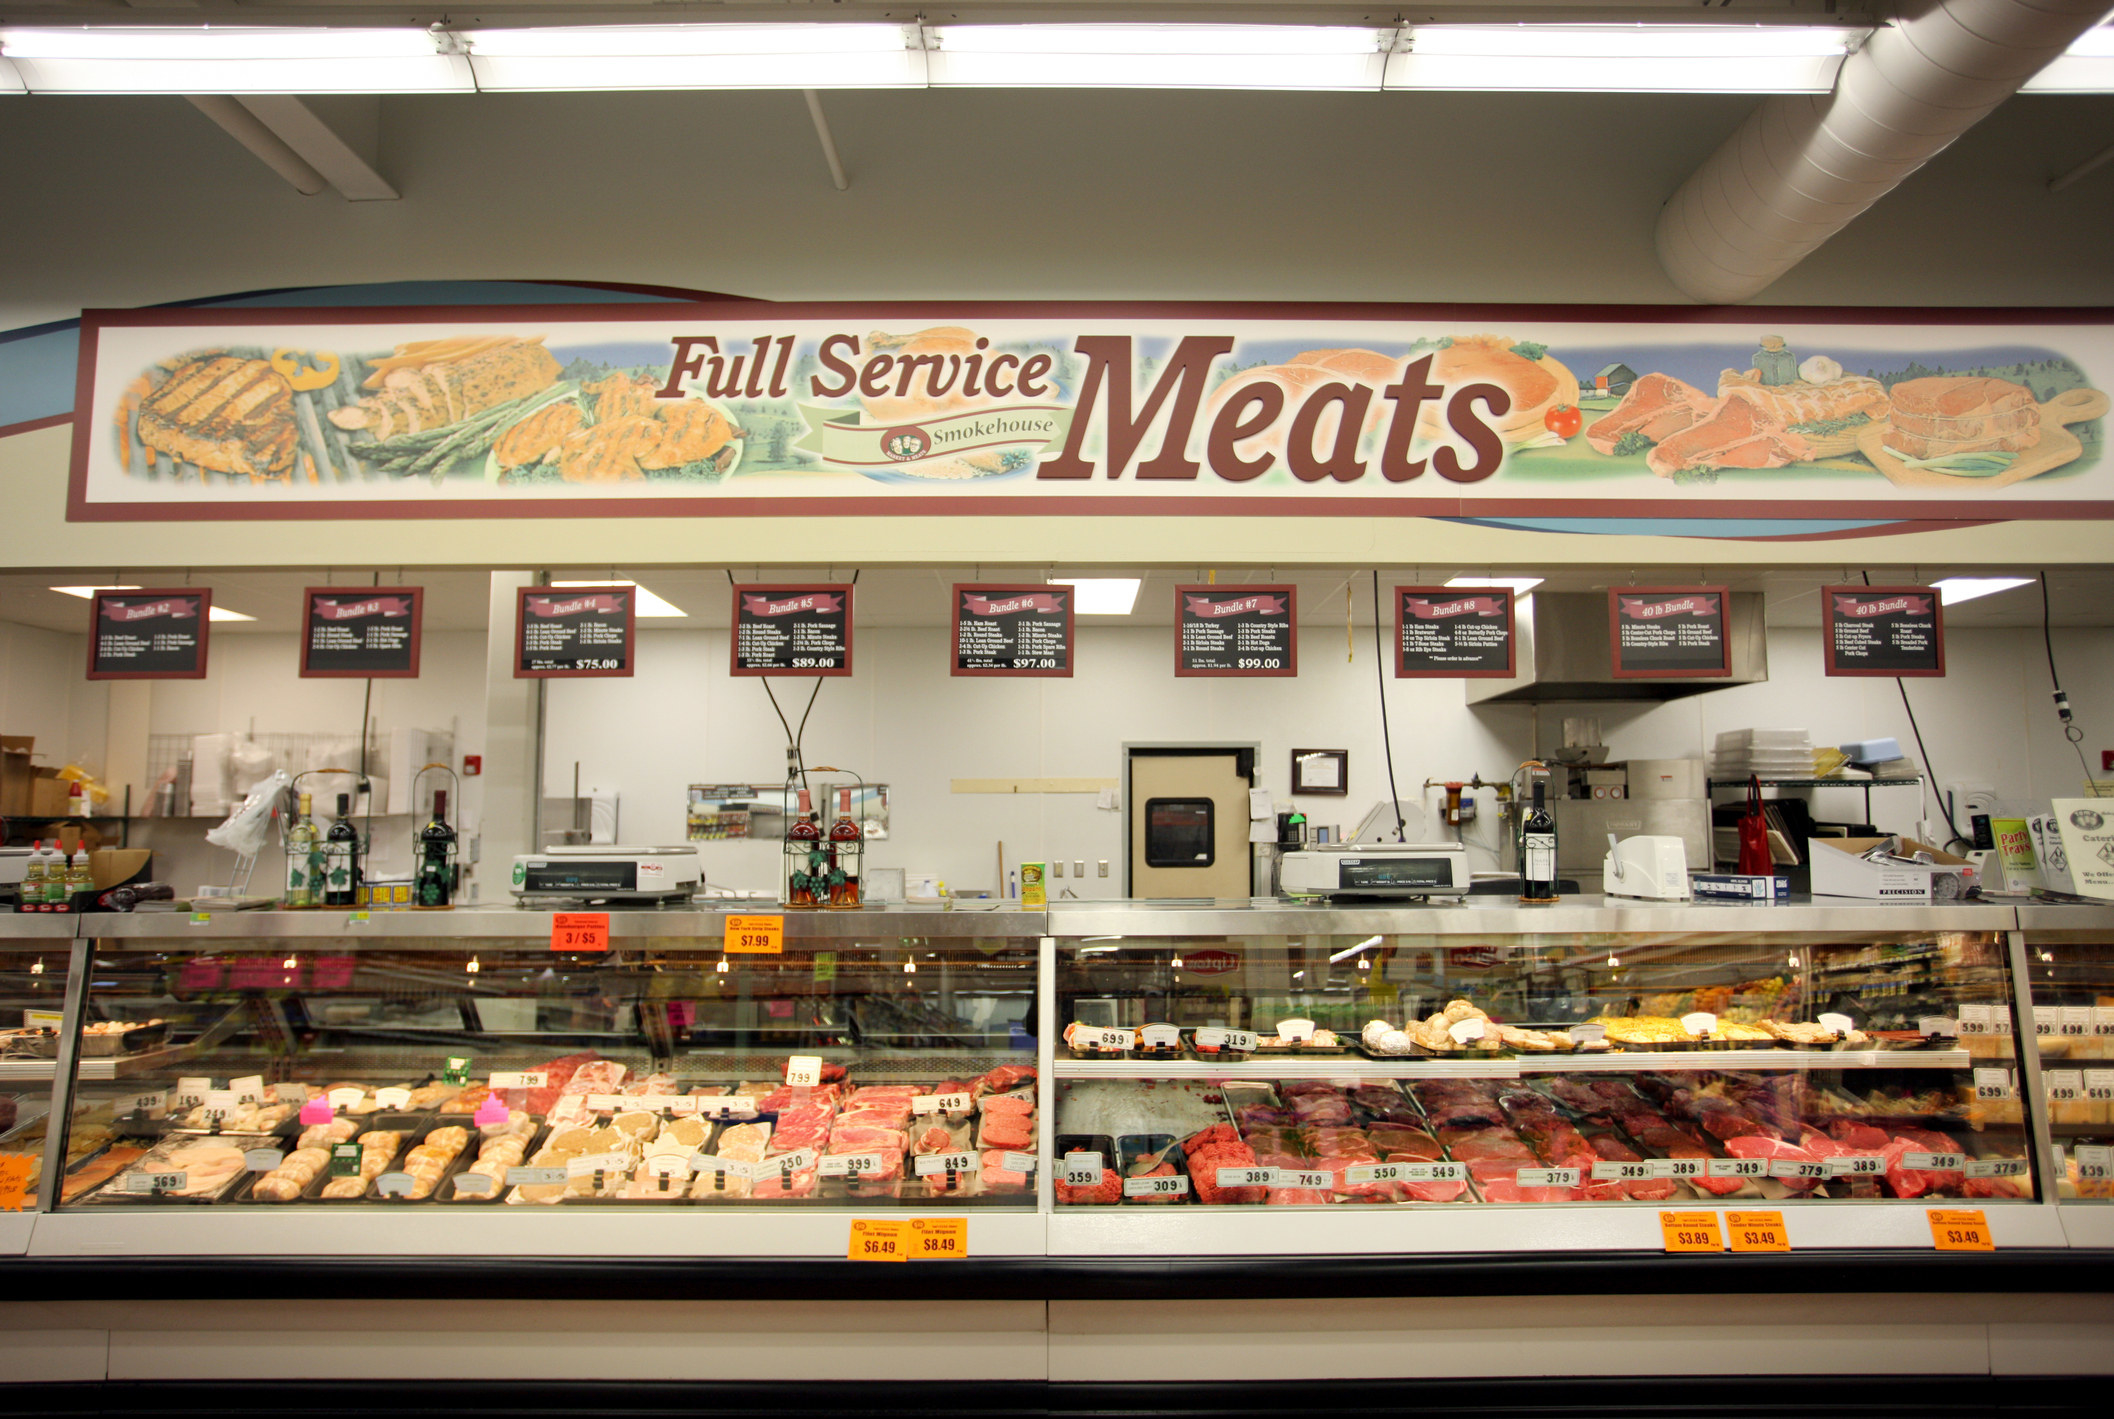 A display of fresh meats in a store